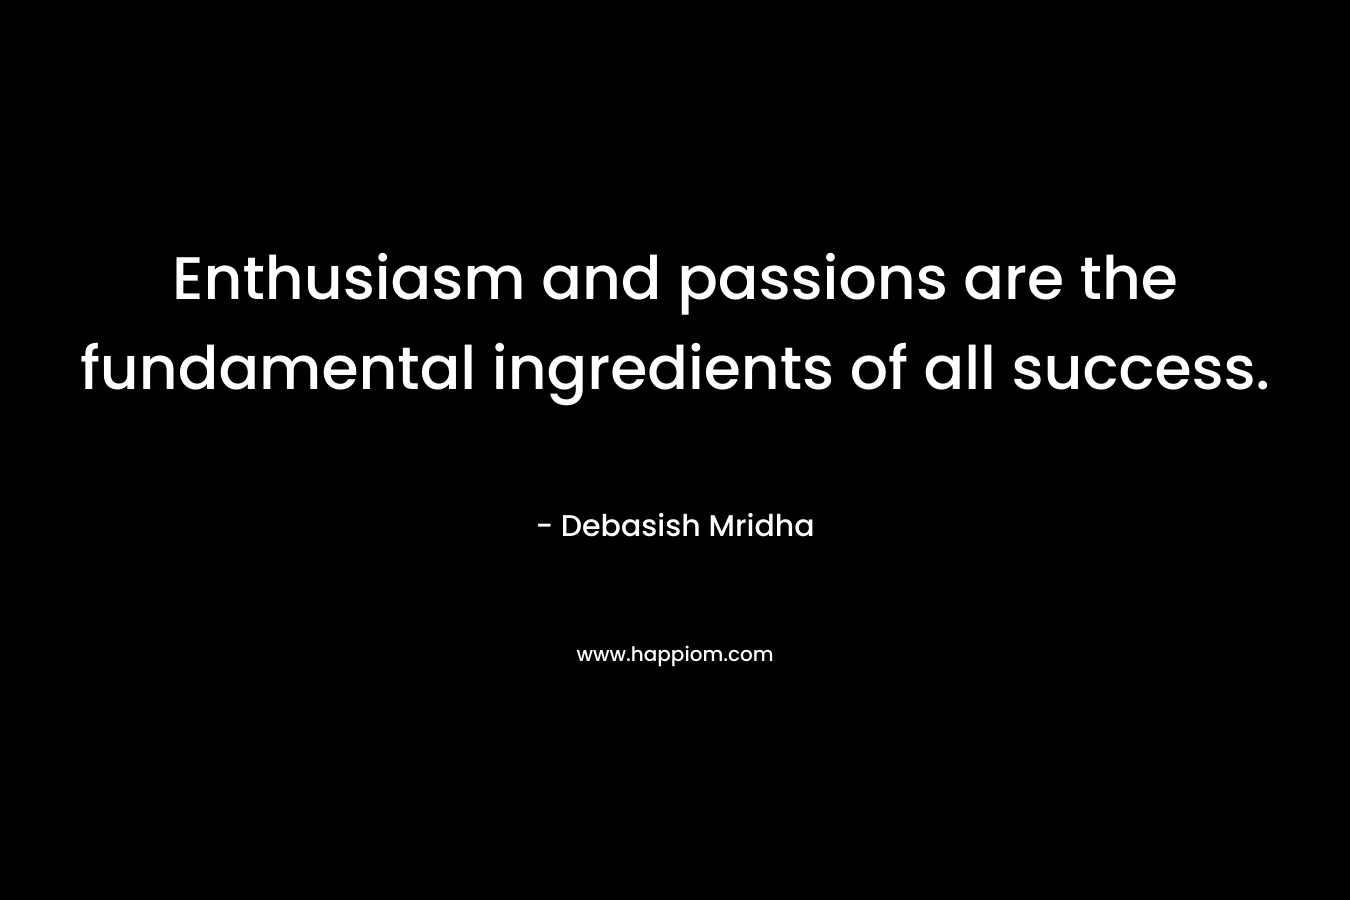 Enthusiasm and passions are the fundamental ingredients of all success. – Debasish Mridha